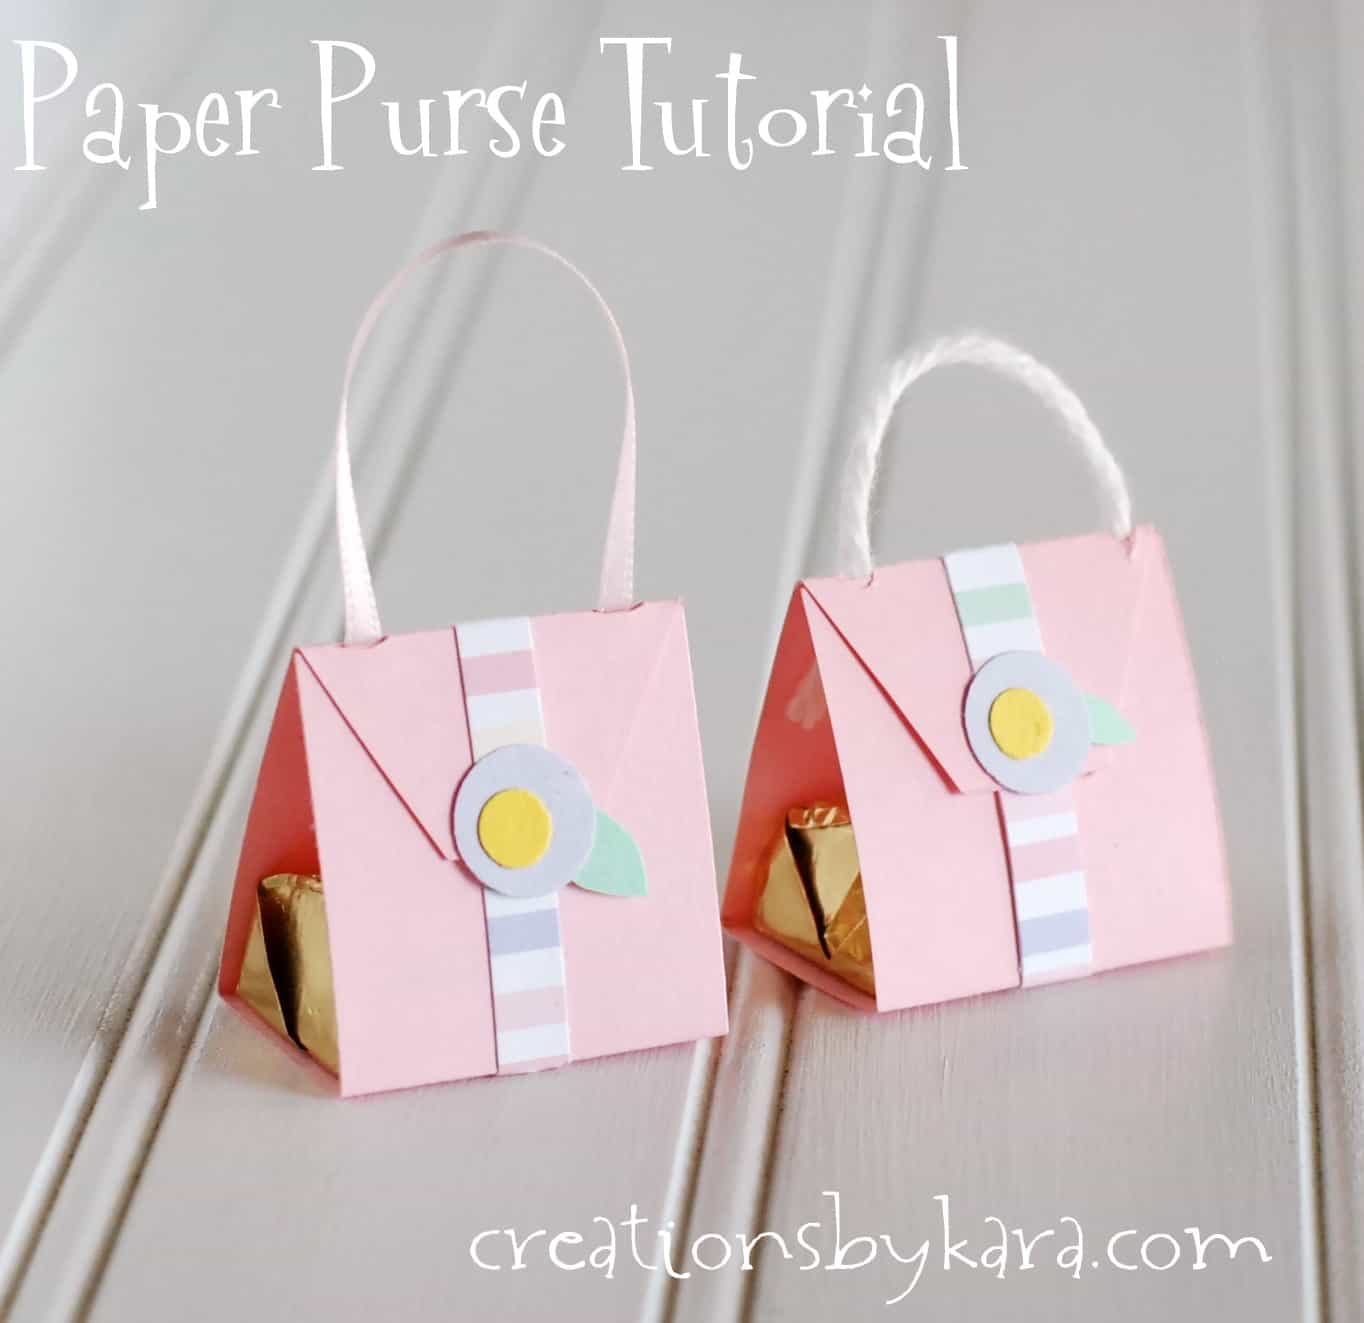 Buy Paper Purse Online In India - Etsy India